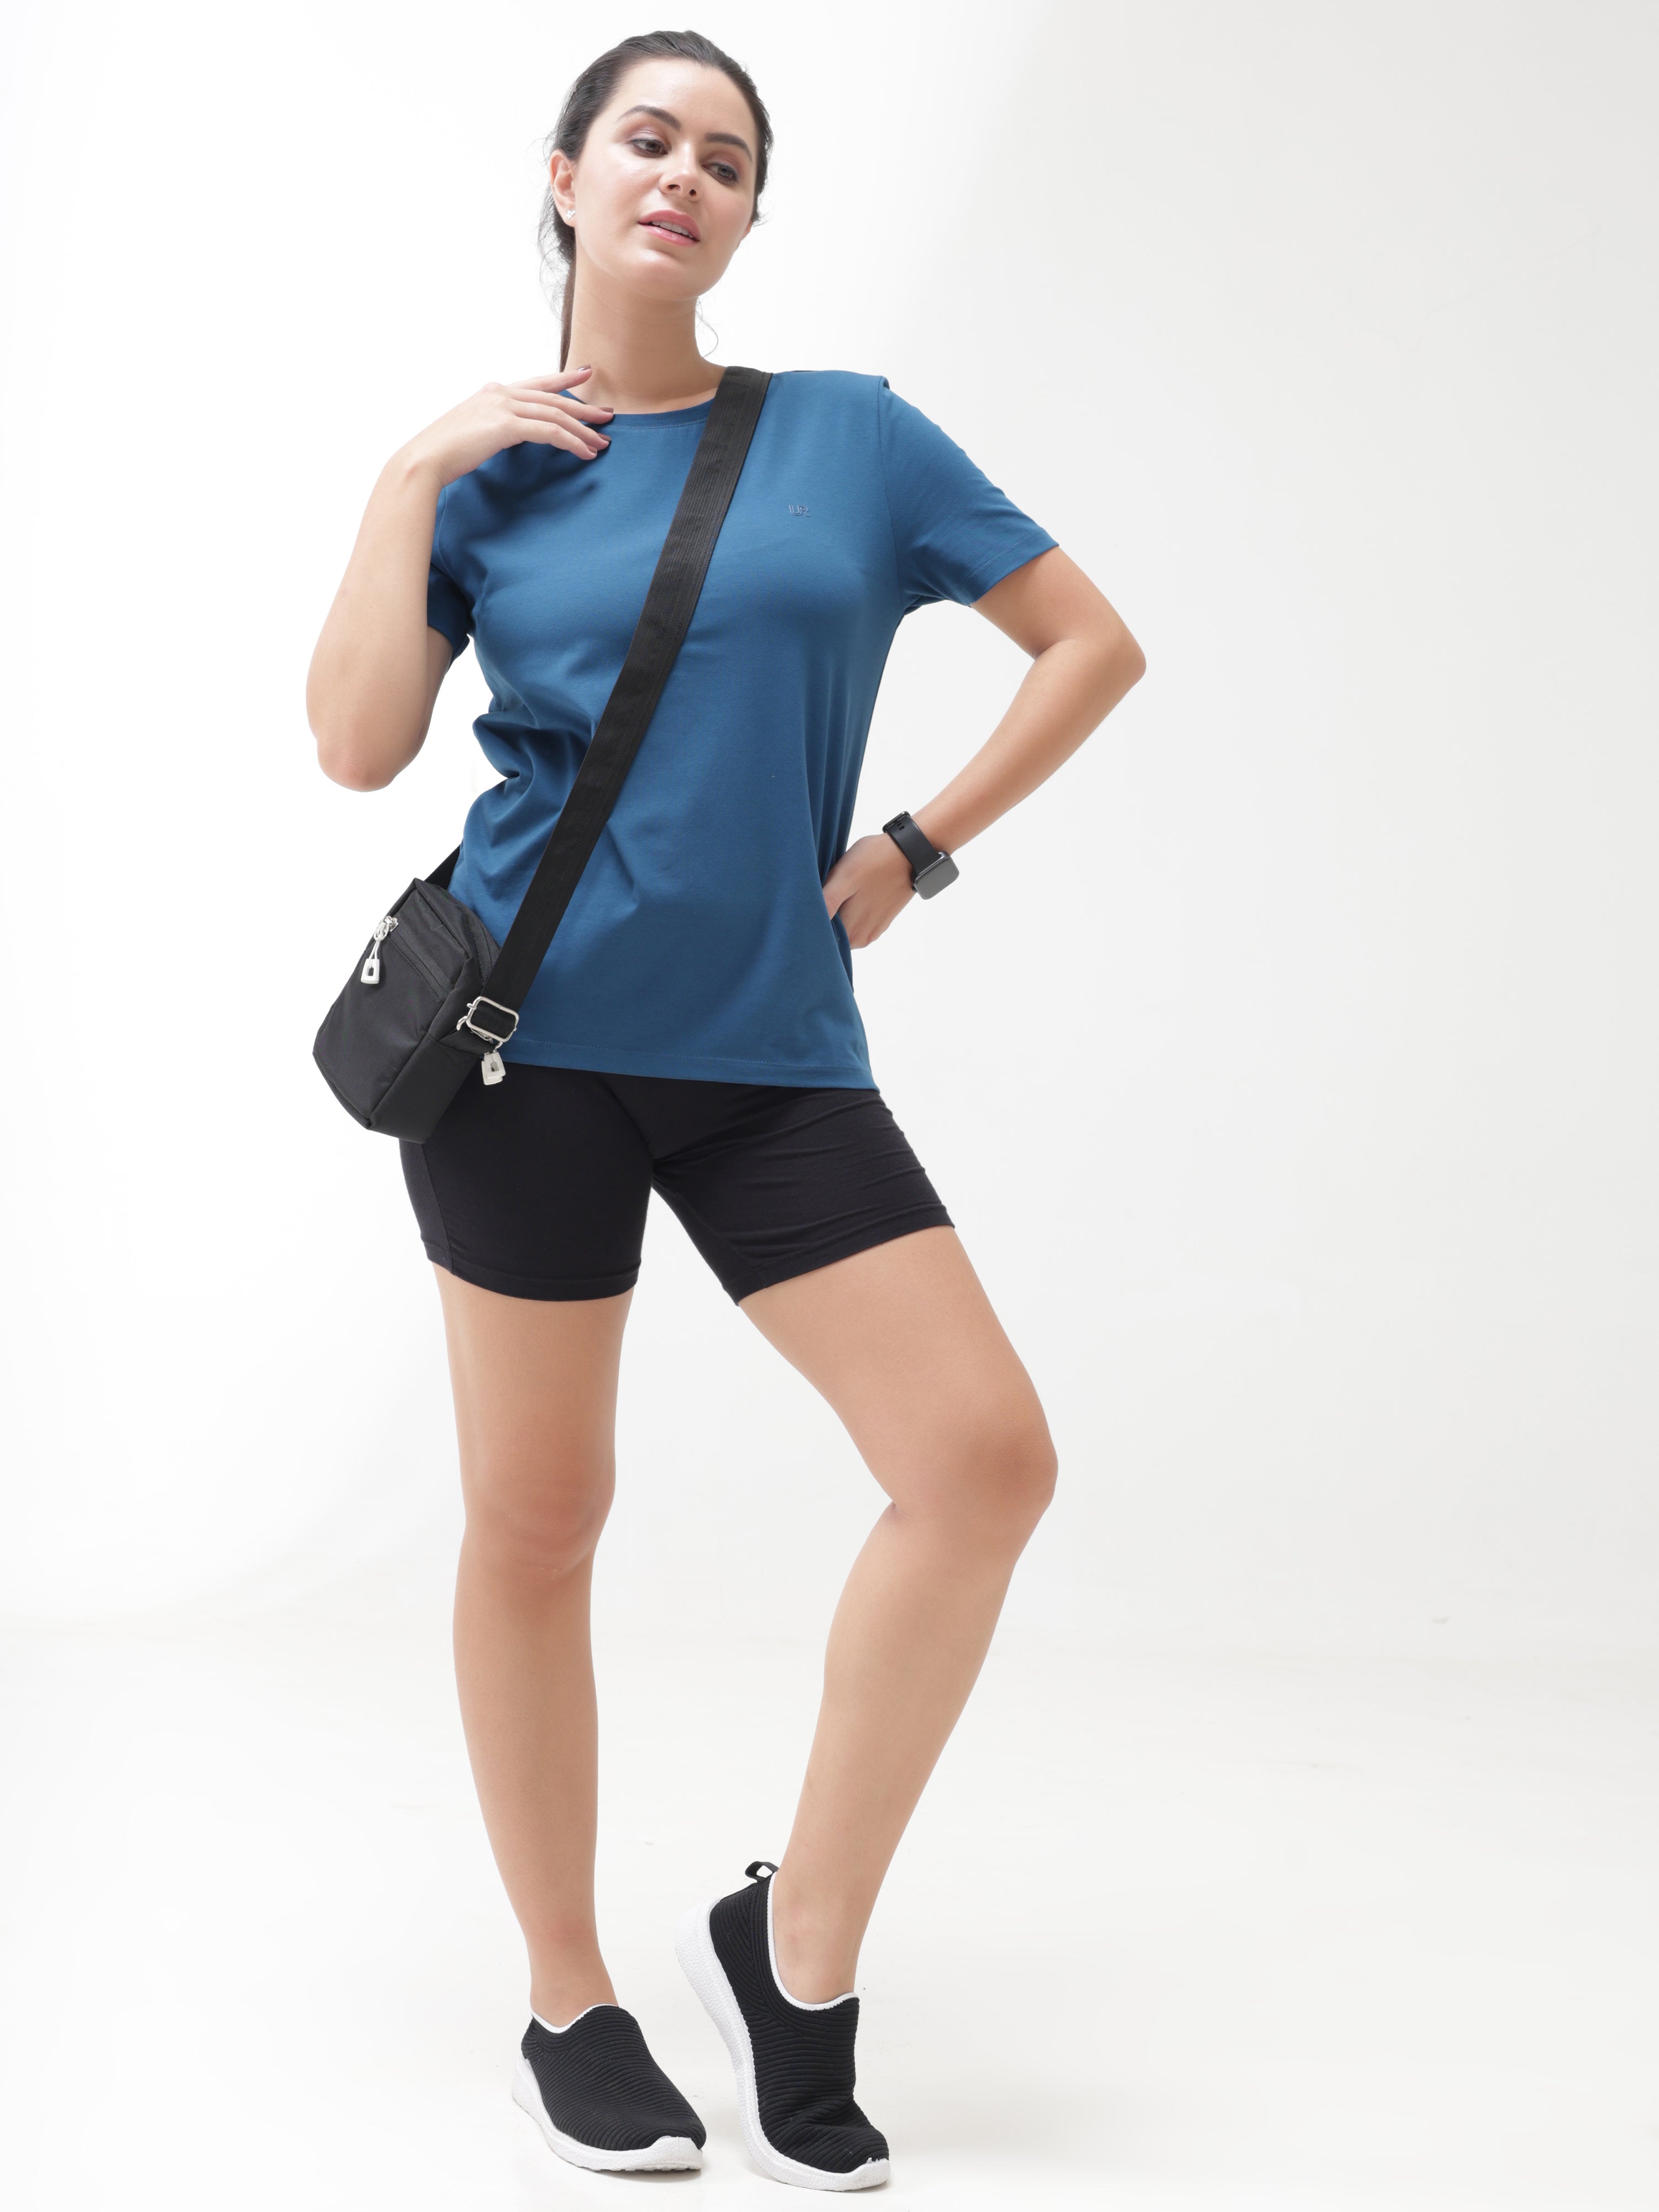 Woman in a Sea Blue Turms anti-stain, anti-odour, and stretchable round-neck T-shirt, wearing black shorts and a crossbody bag.